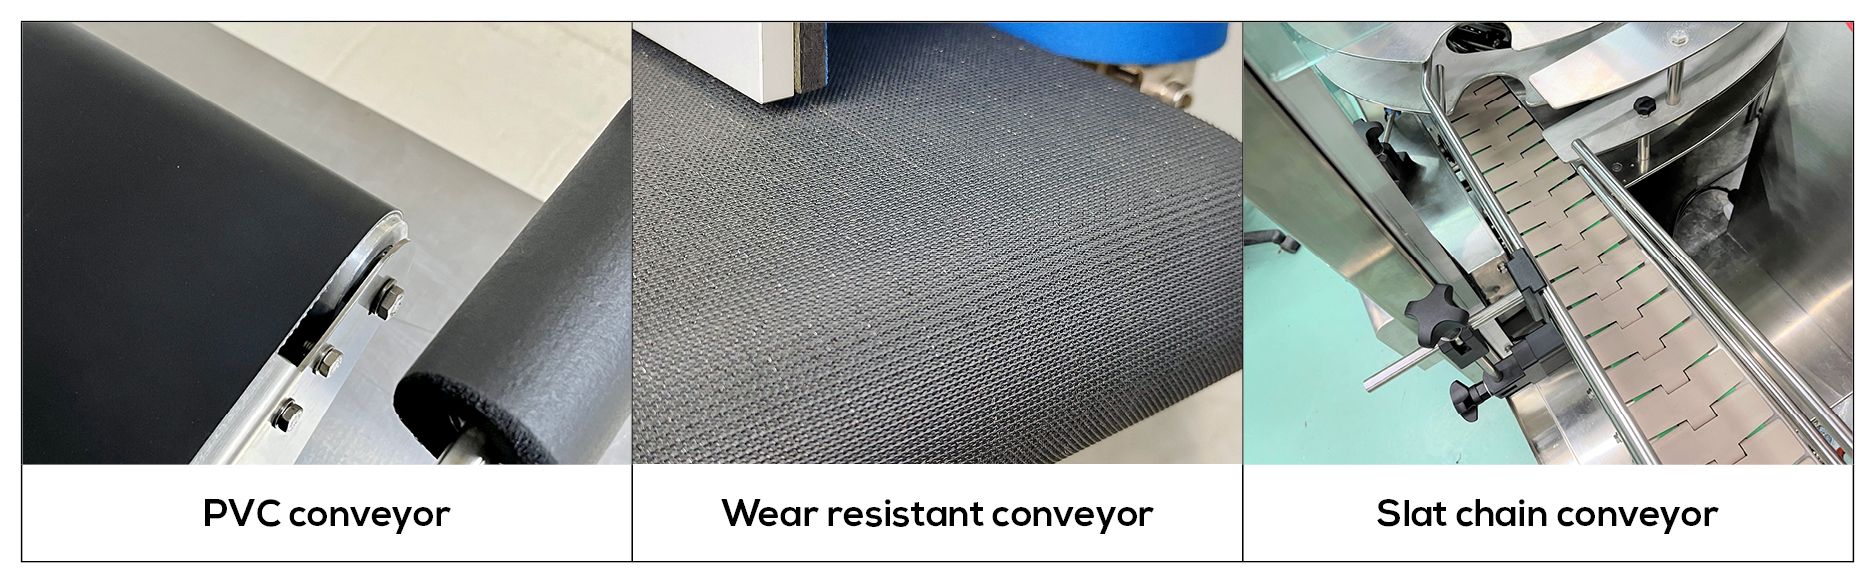 Neostarpack's Automatic Side Labeler including PVC conveyors for flat products, wear resistant conveyors for bottles, and slat chain conveyors for large-capacity and heavier products.